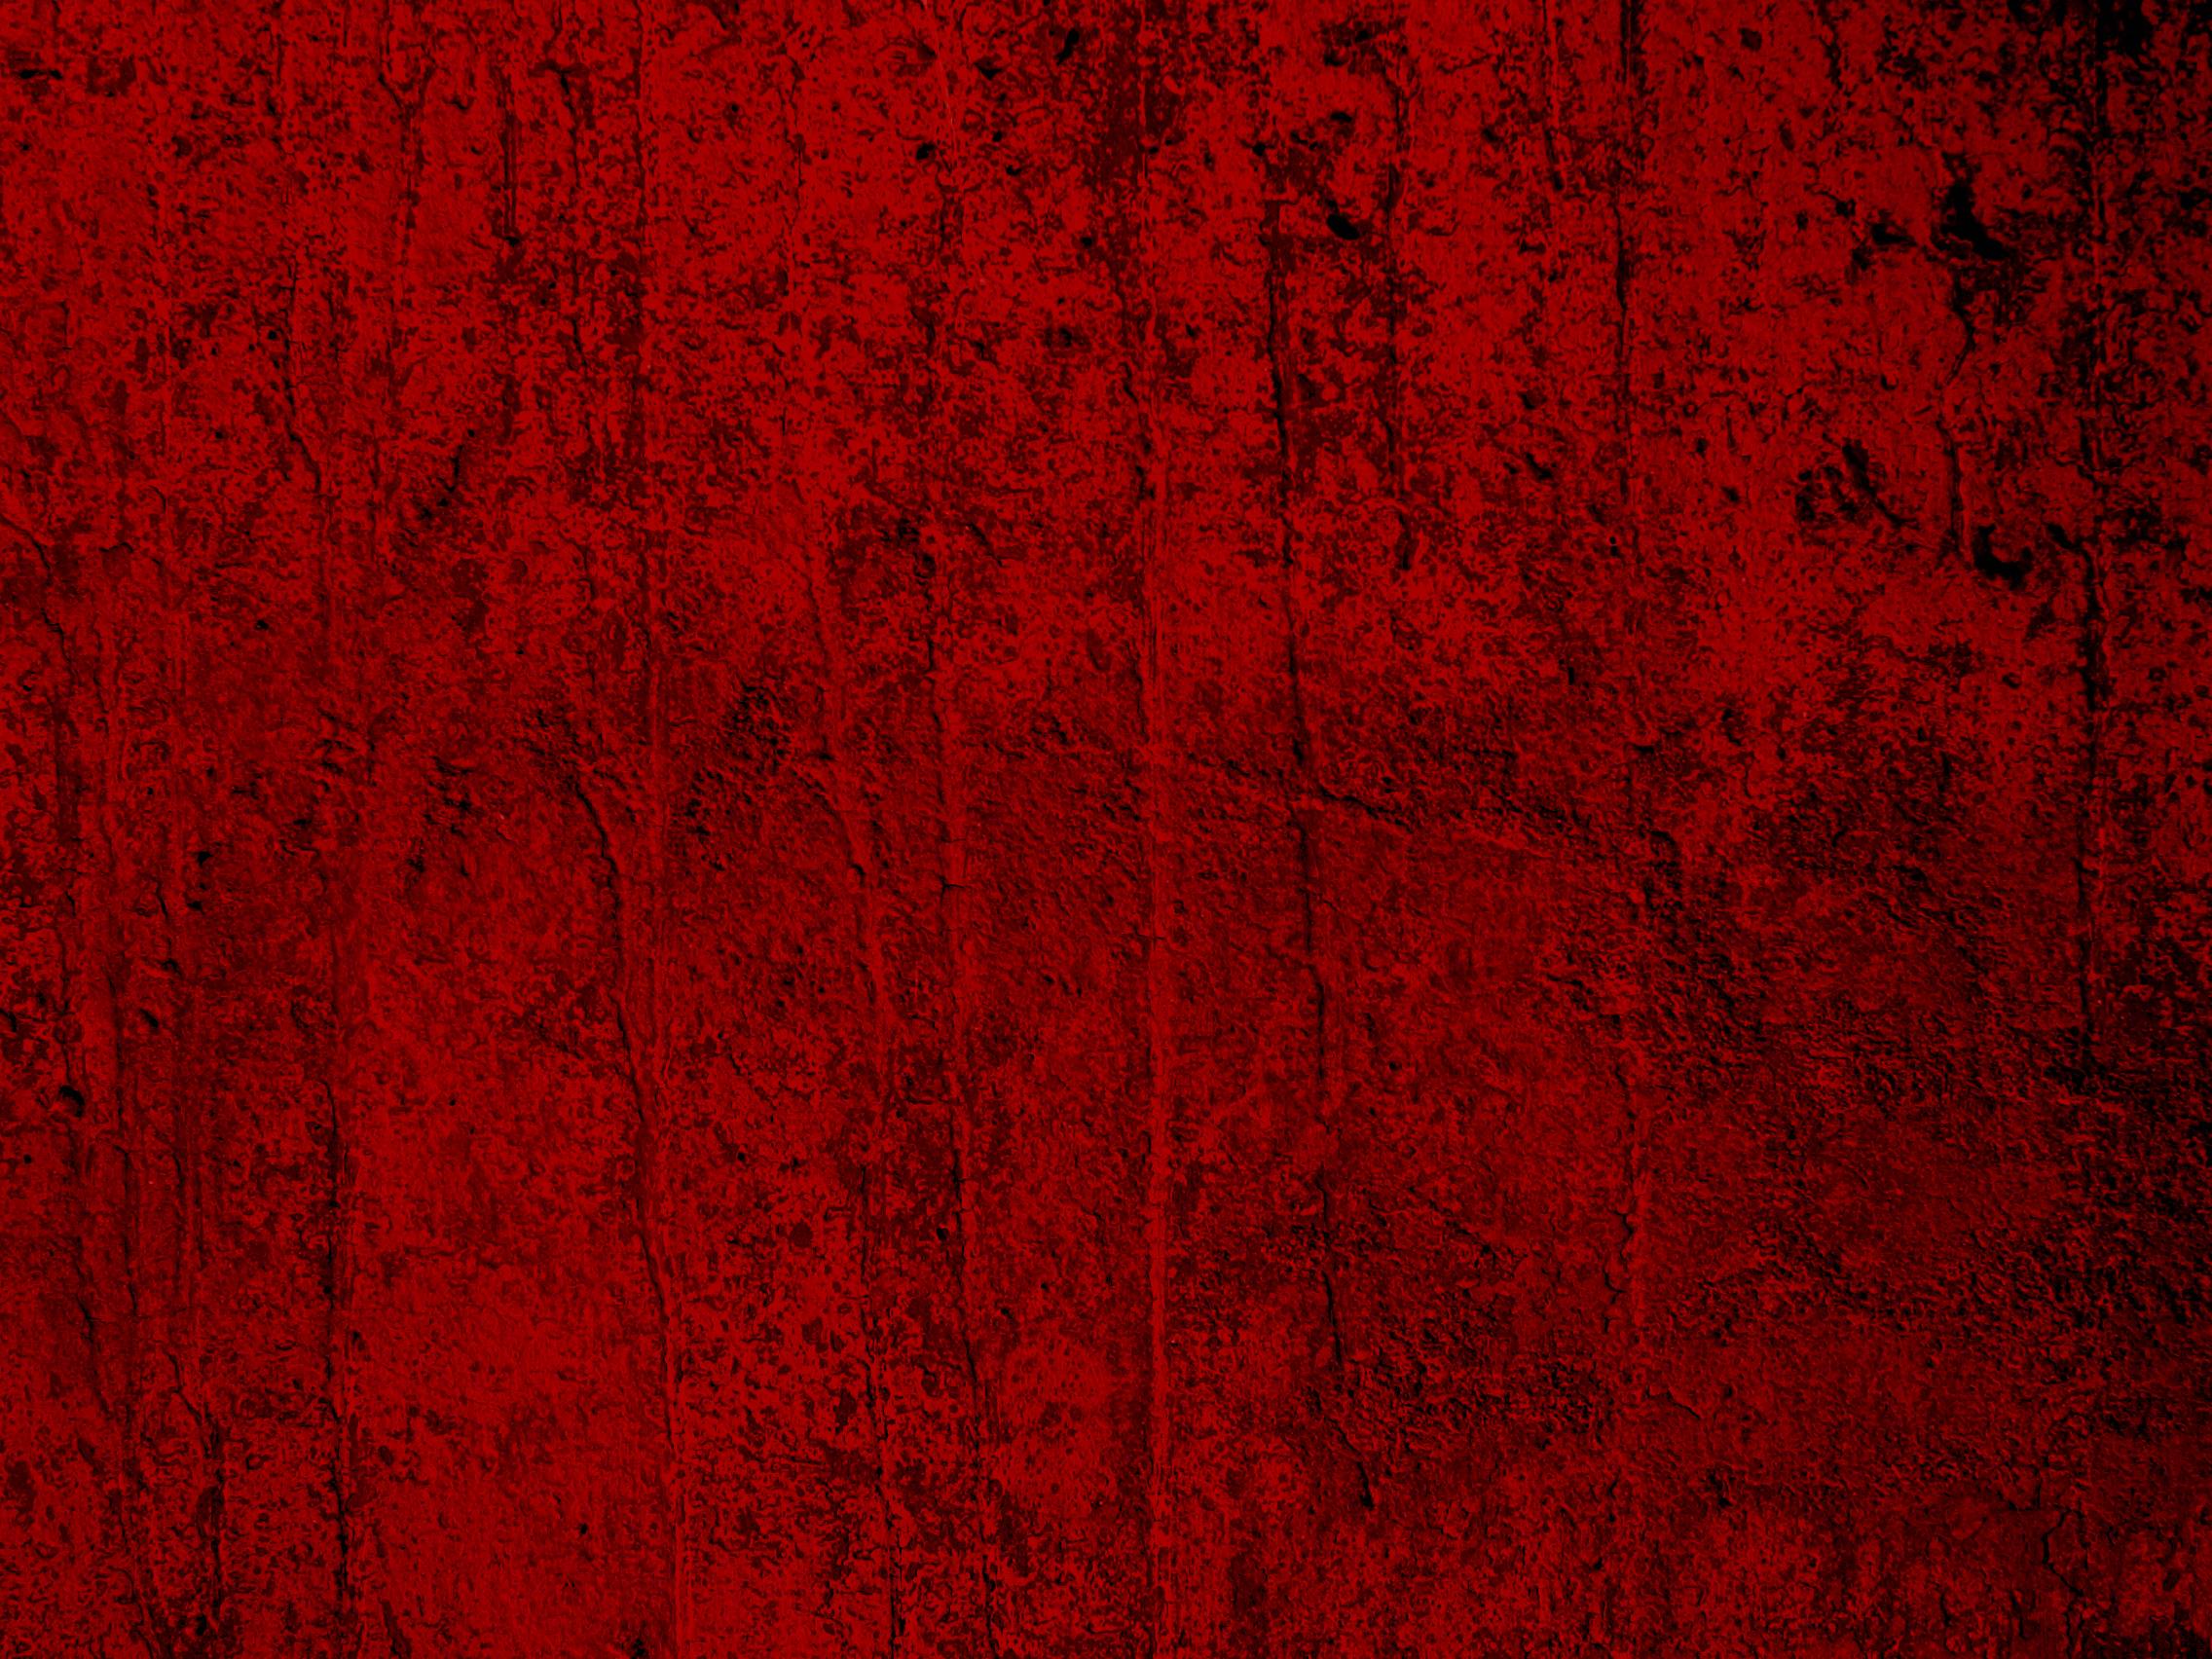 Red Background 55 228080 High Definition Wallpaper. wallalay